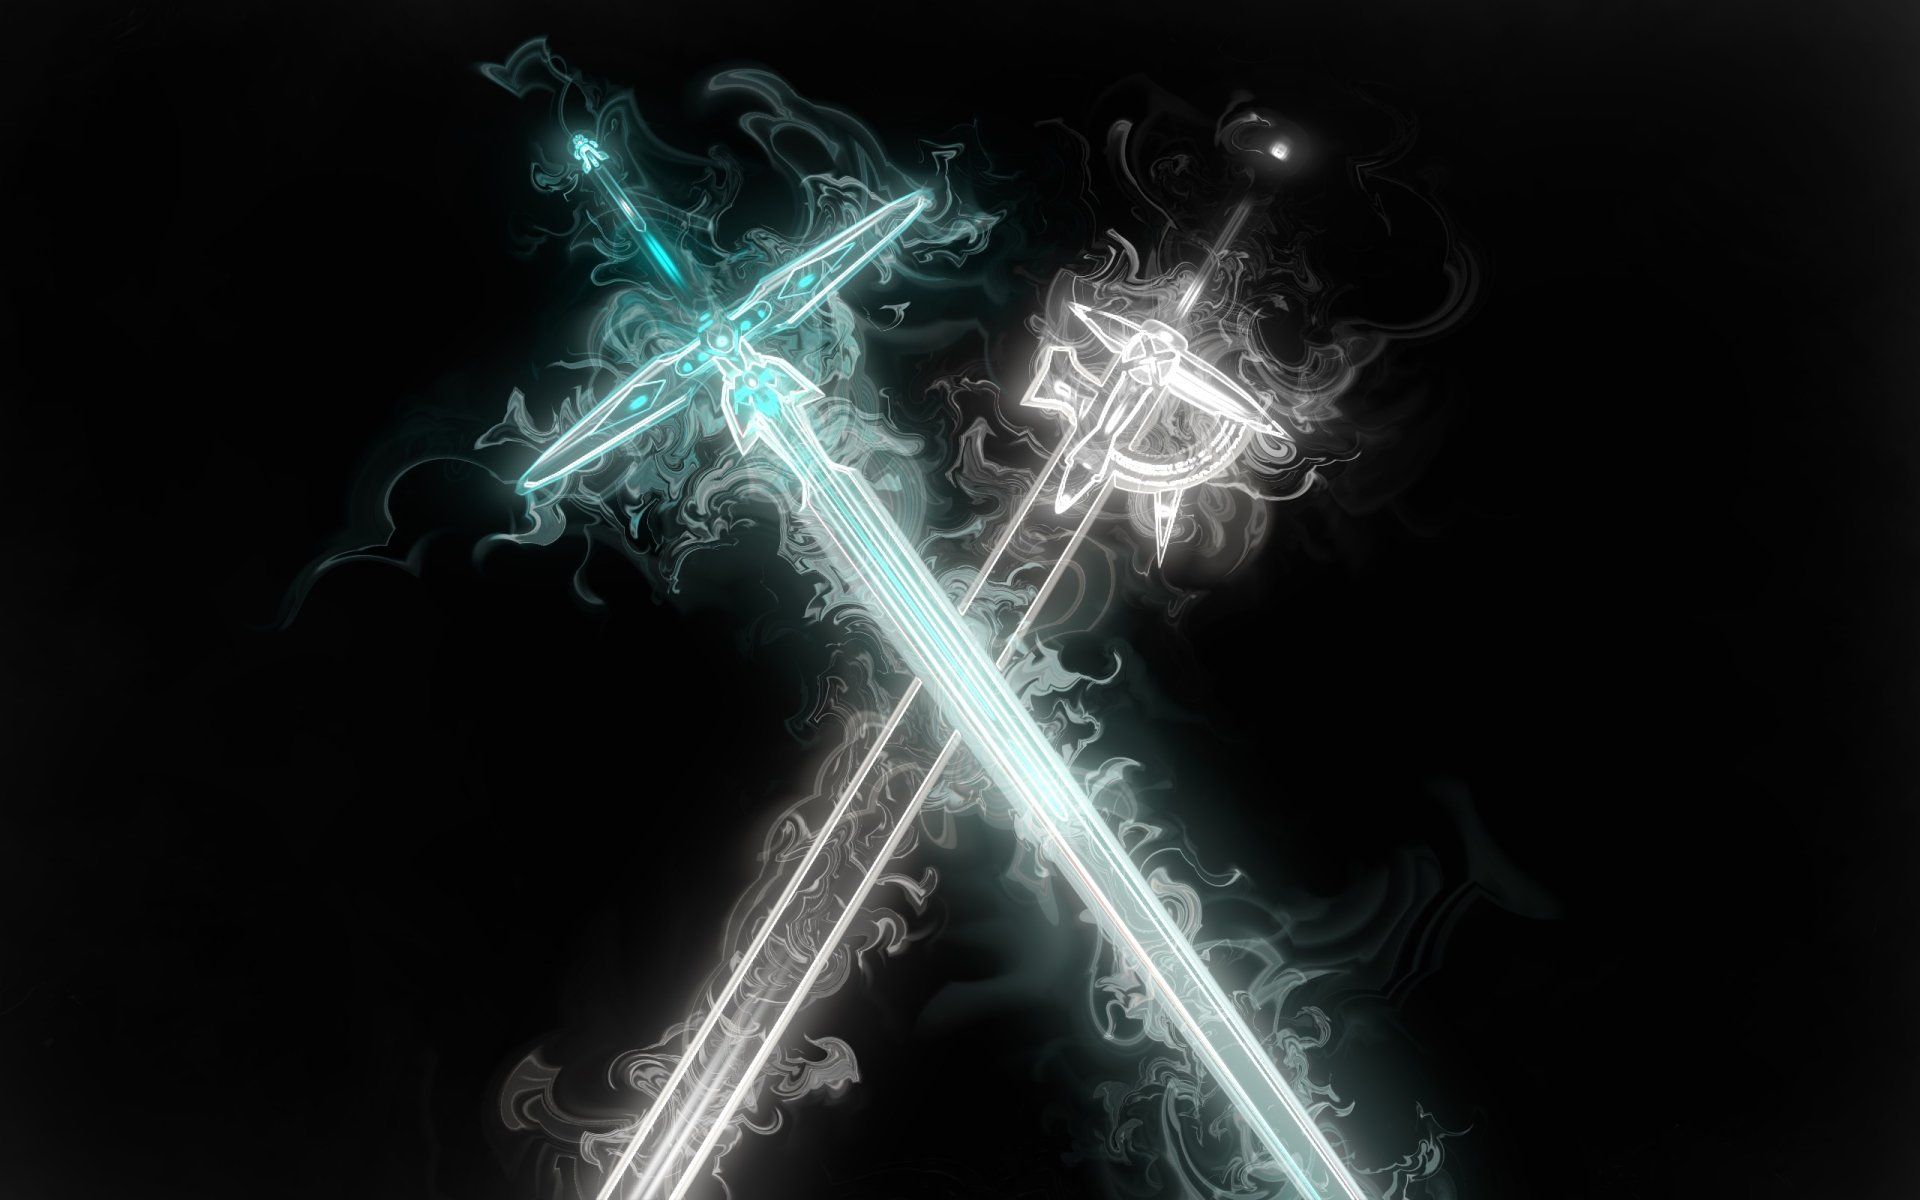 The Sword Wallpapers